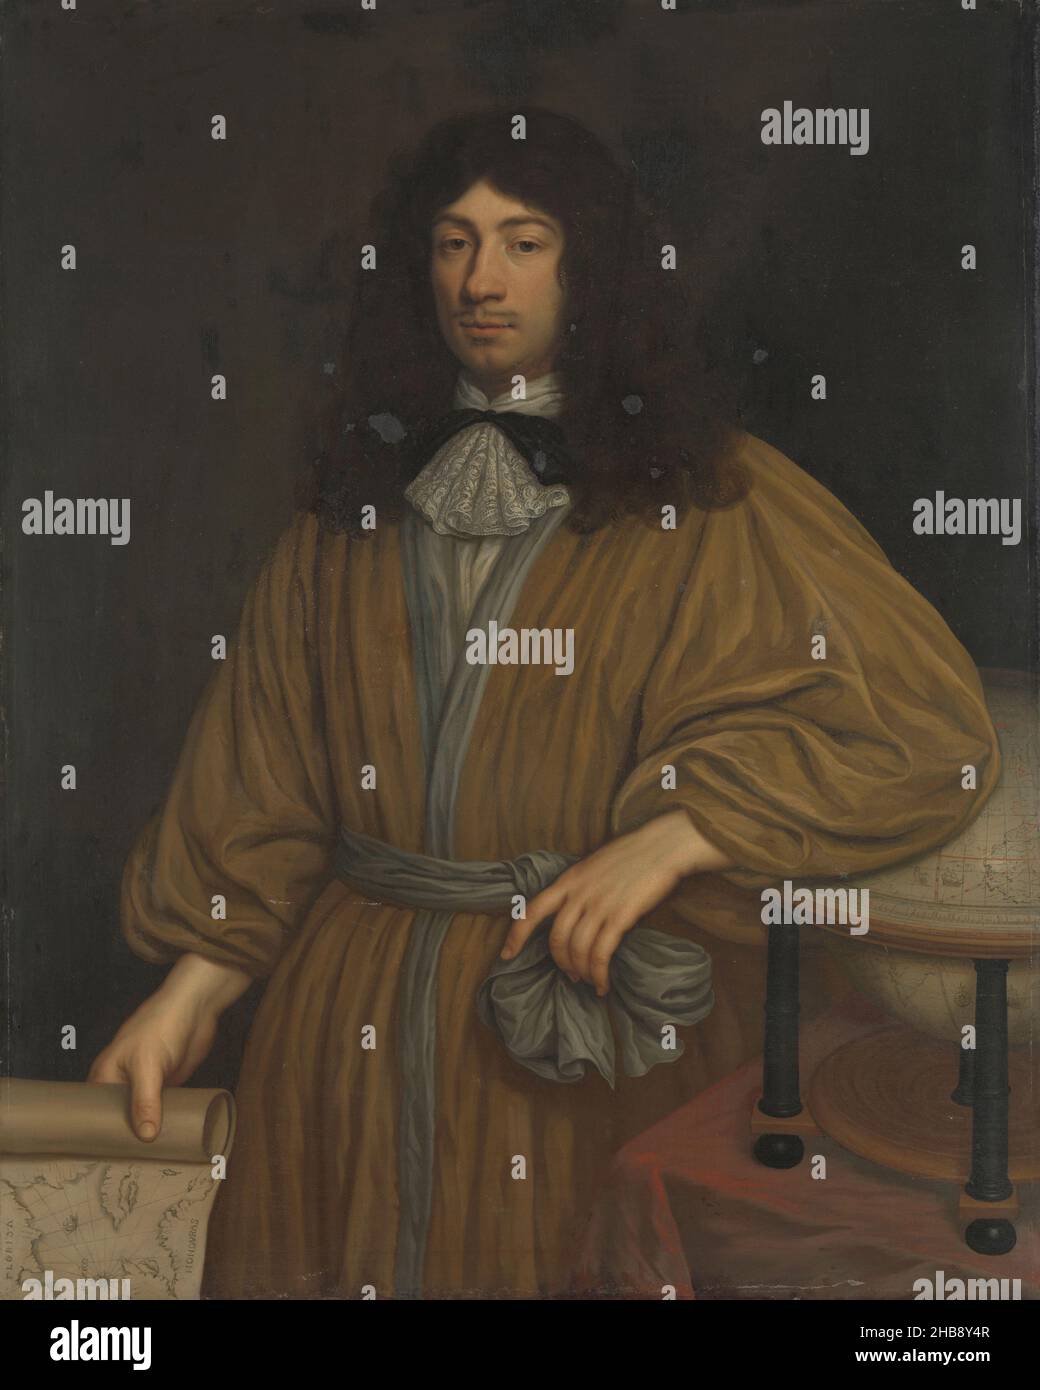 Johan Boudaen Courten (1635-1716), Lord of St Laurens, Schellach and Popkensburg. Councillor of Middelburg and Director of the East India Company, Portrait of Johan Boudaen Courten, Lord of St Laurens, Schellach and Popkensburg. Councillor of Middelburg and administrator of the VOC. Kneepiece, standing, holding a nautical chart of the Caribbean in the right hand, the left arm leaning on a globe., painter: Cornelis Janssens van Ceulen (II), 1668, canvas, oil paint (paint), height 116 cm × width 94 cm, depth 9.5 cm Stock Photo